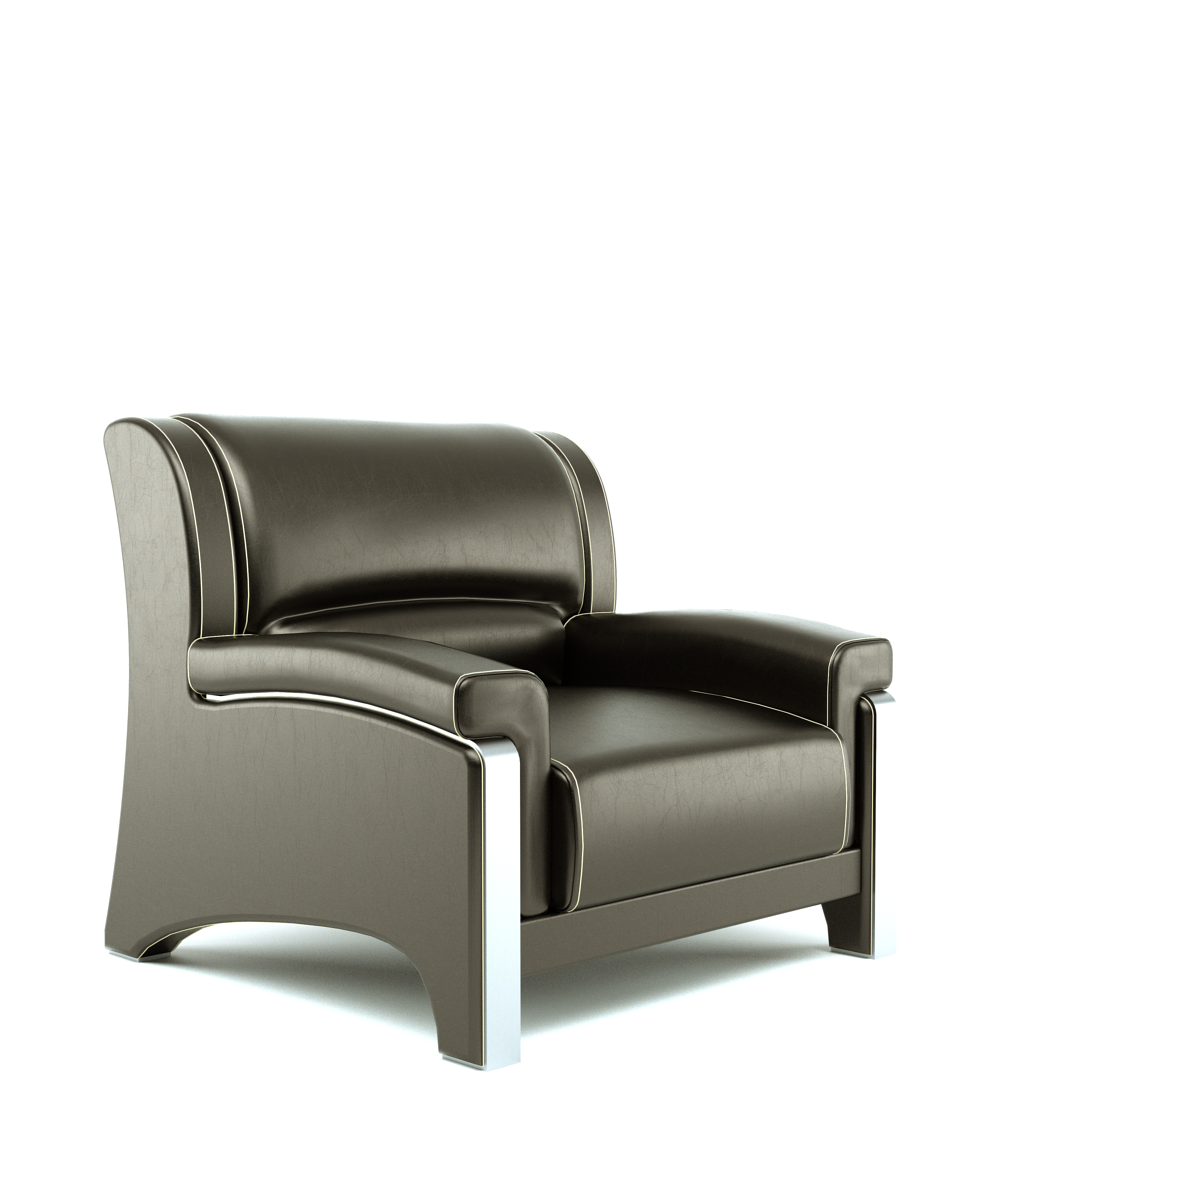 Office furniture brown armchair.png